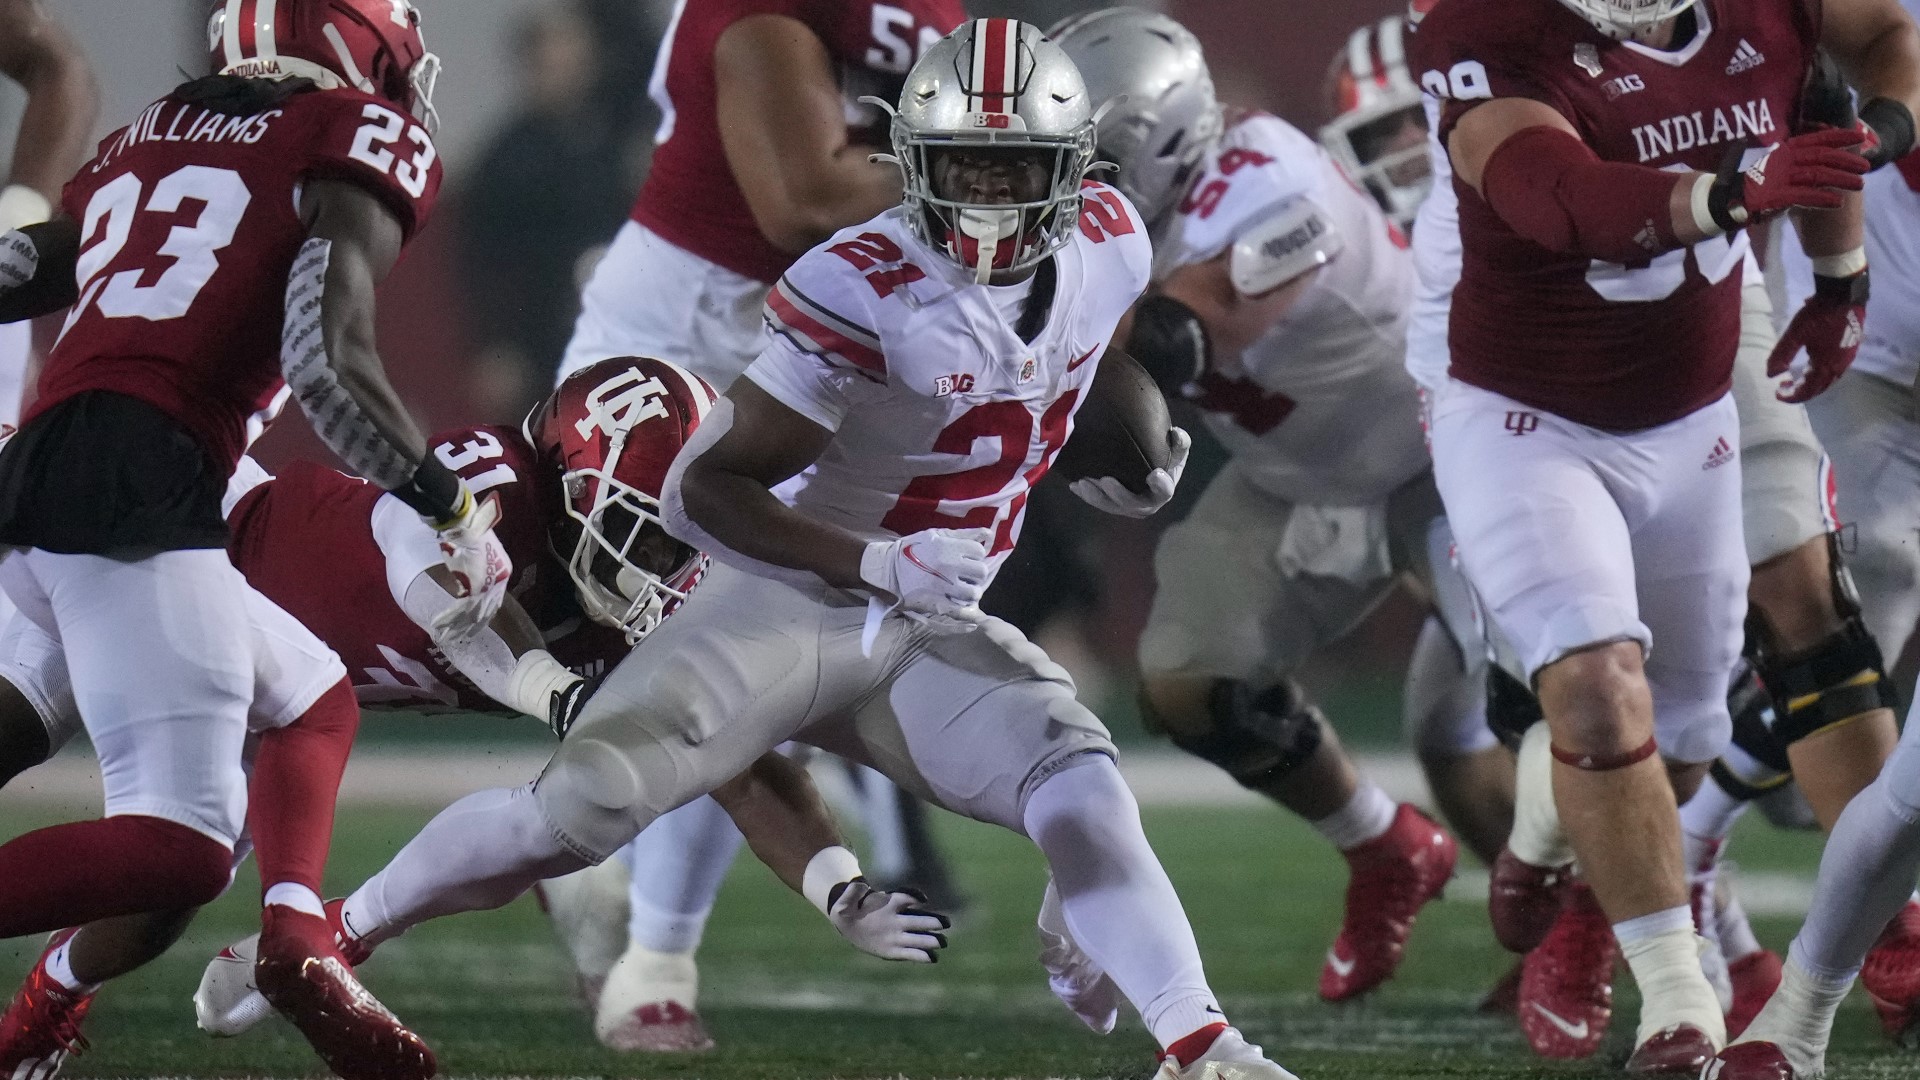 Pryor was expected to the Buckeyes No. 3 running back behind TreVeyon Henderson and Miyan Williams.